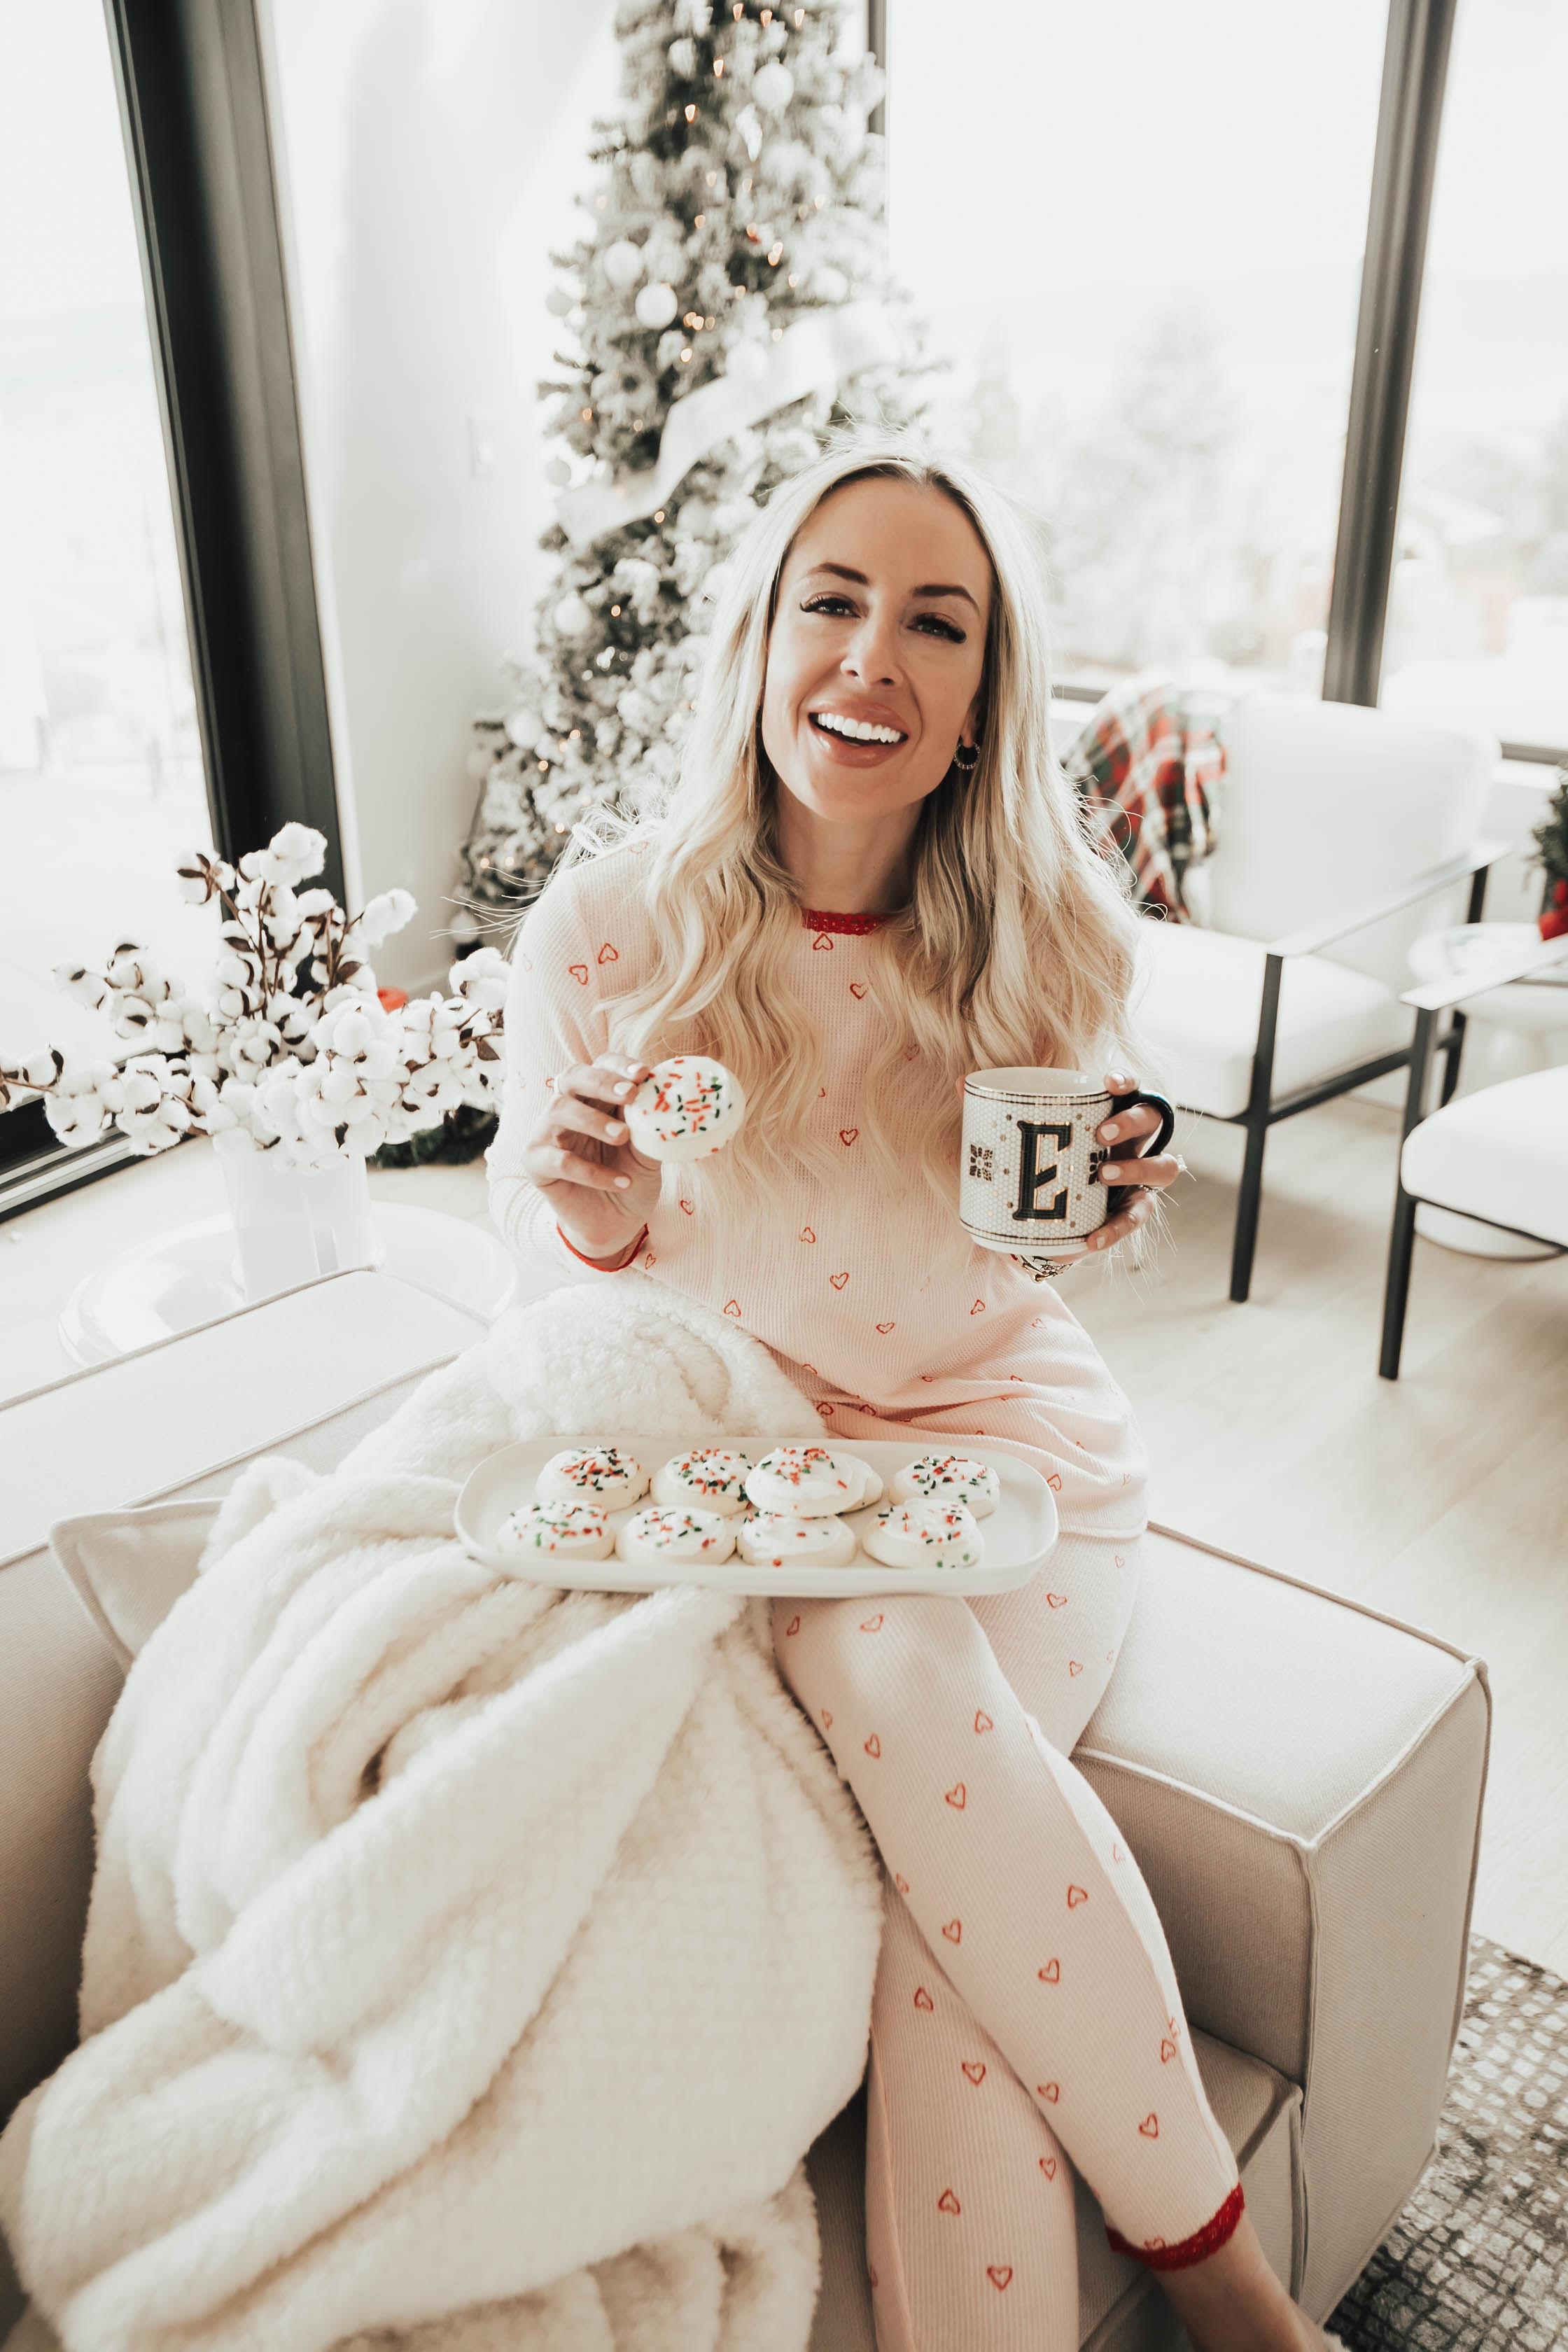 Reno bloggers Ashley Zeal and Emily Wieczorek from Two Peas in a Prada share the best women's gifts 2019. They cover what to get every lady in your life from your nail girl to your mother-in-law. 